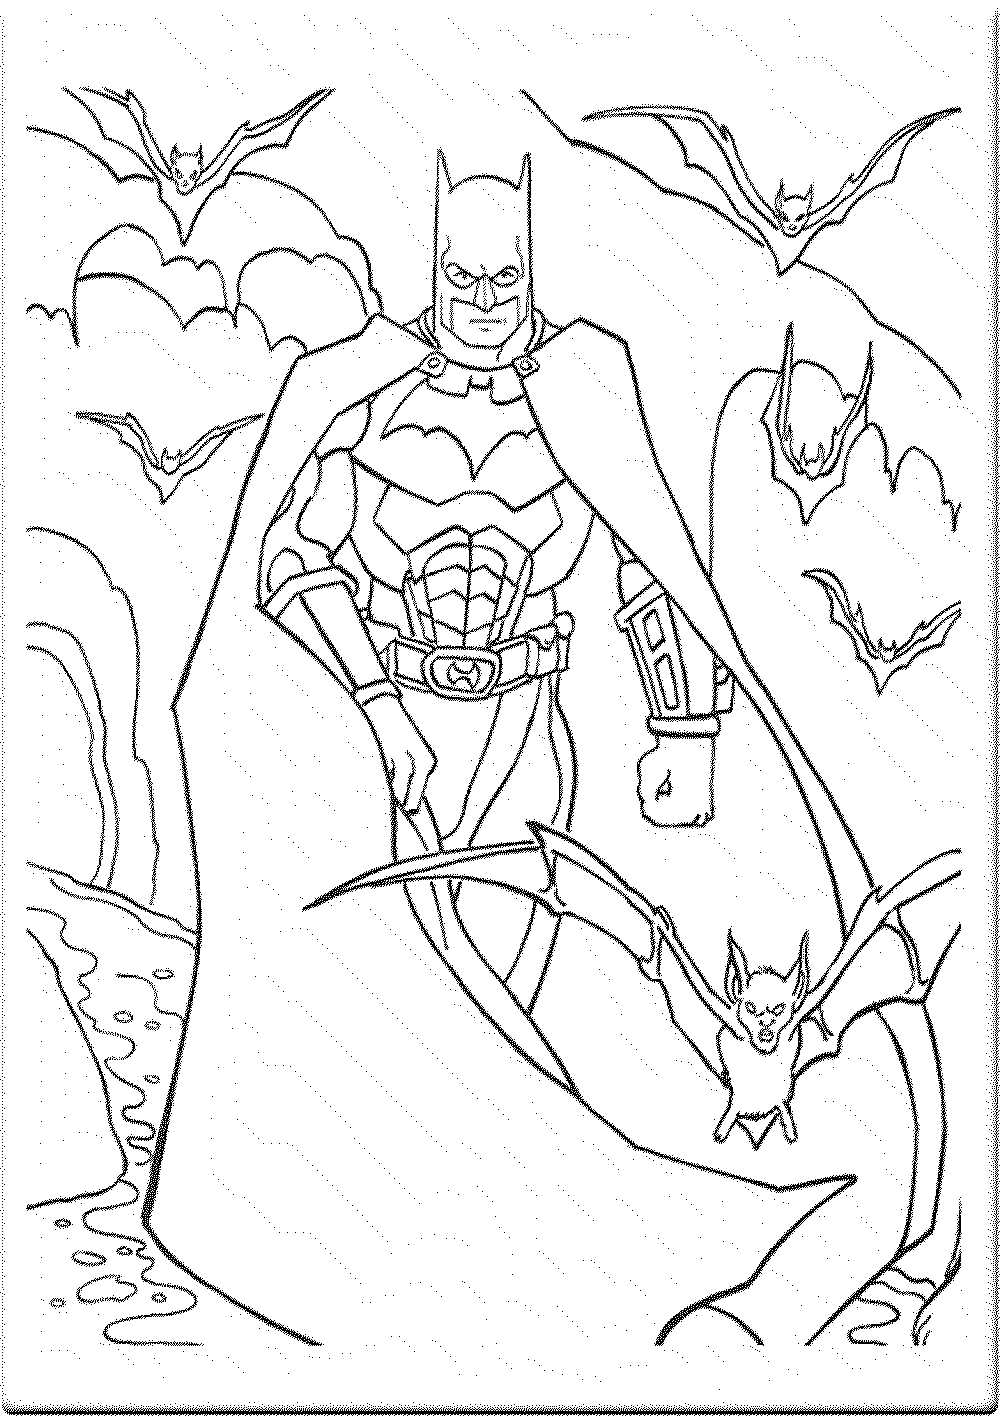 Print & Download Batman Coloring Pages for Your Children